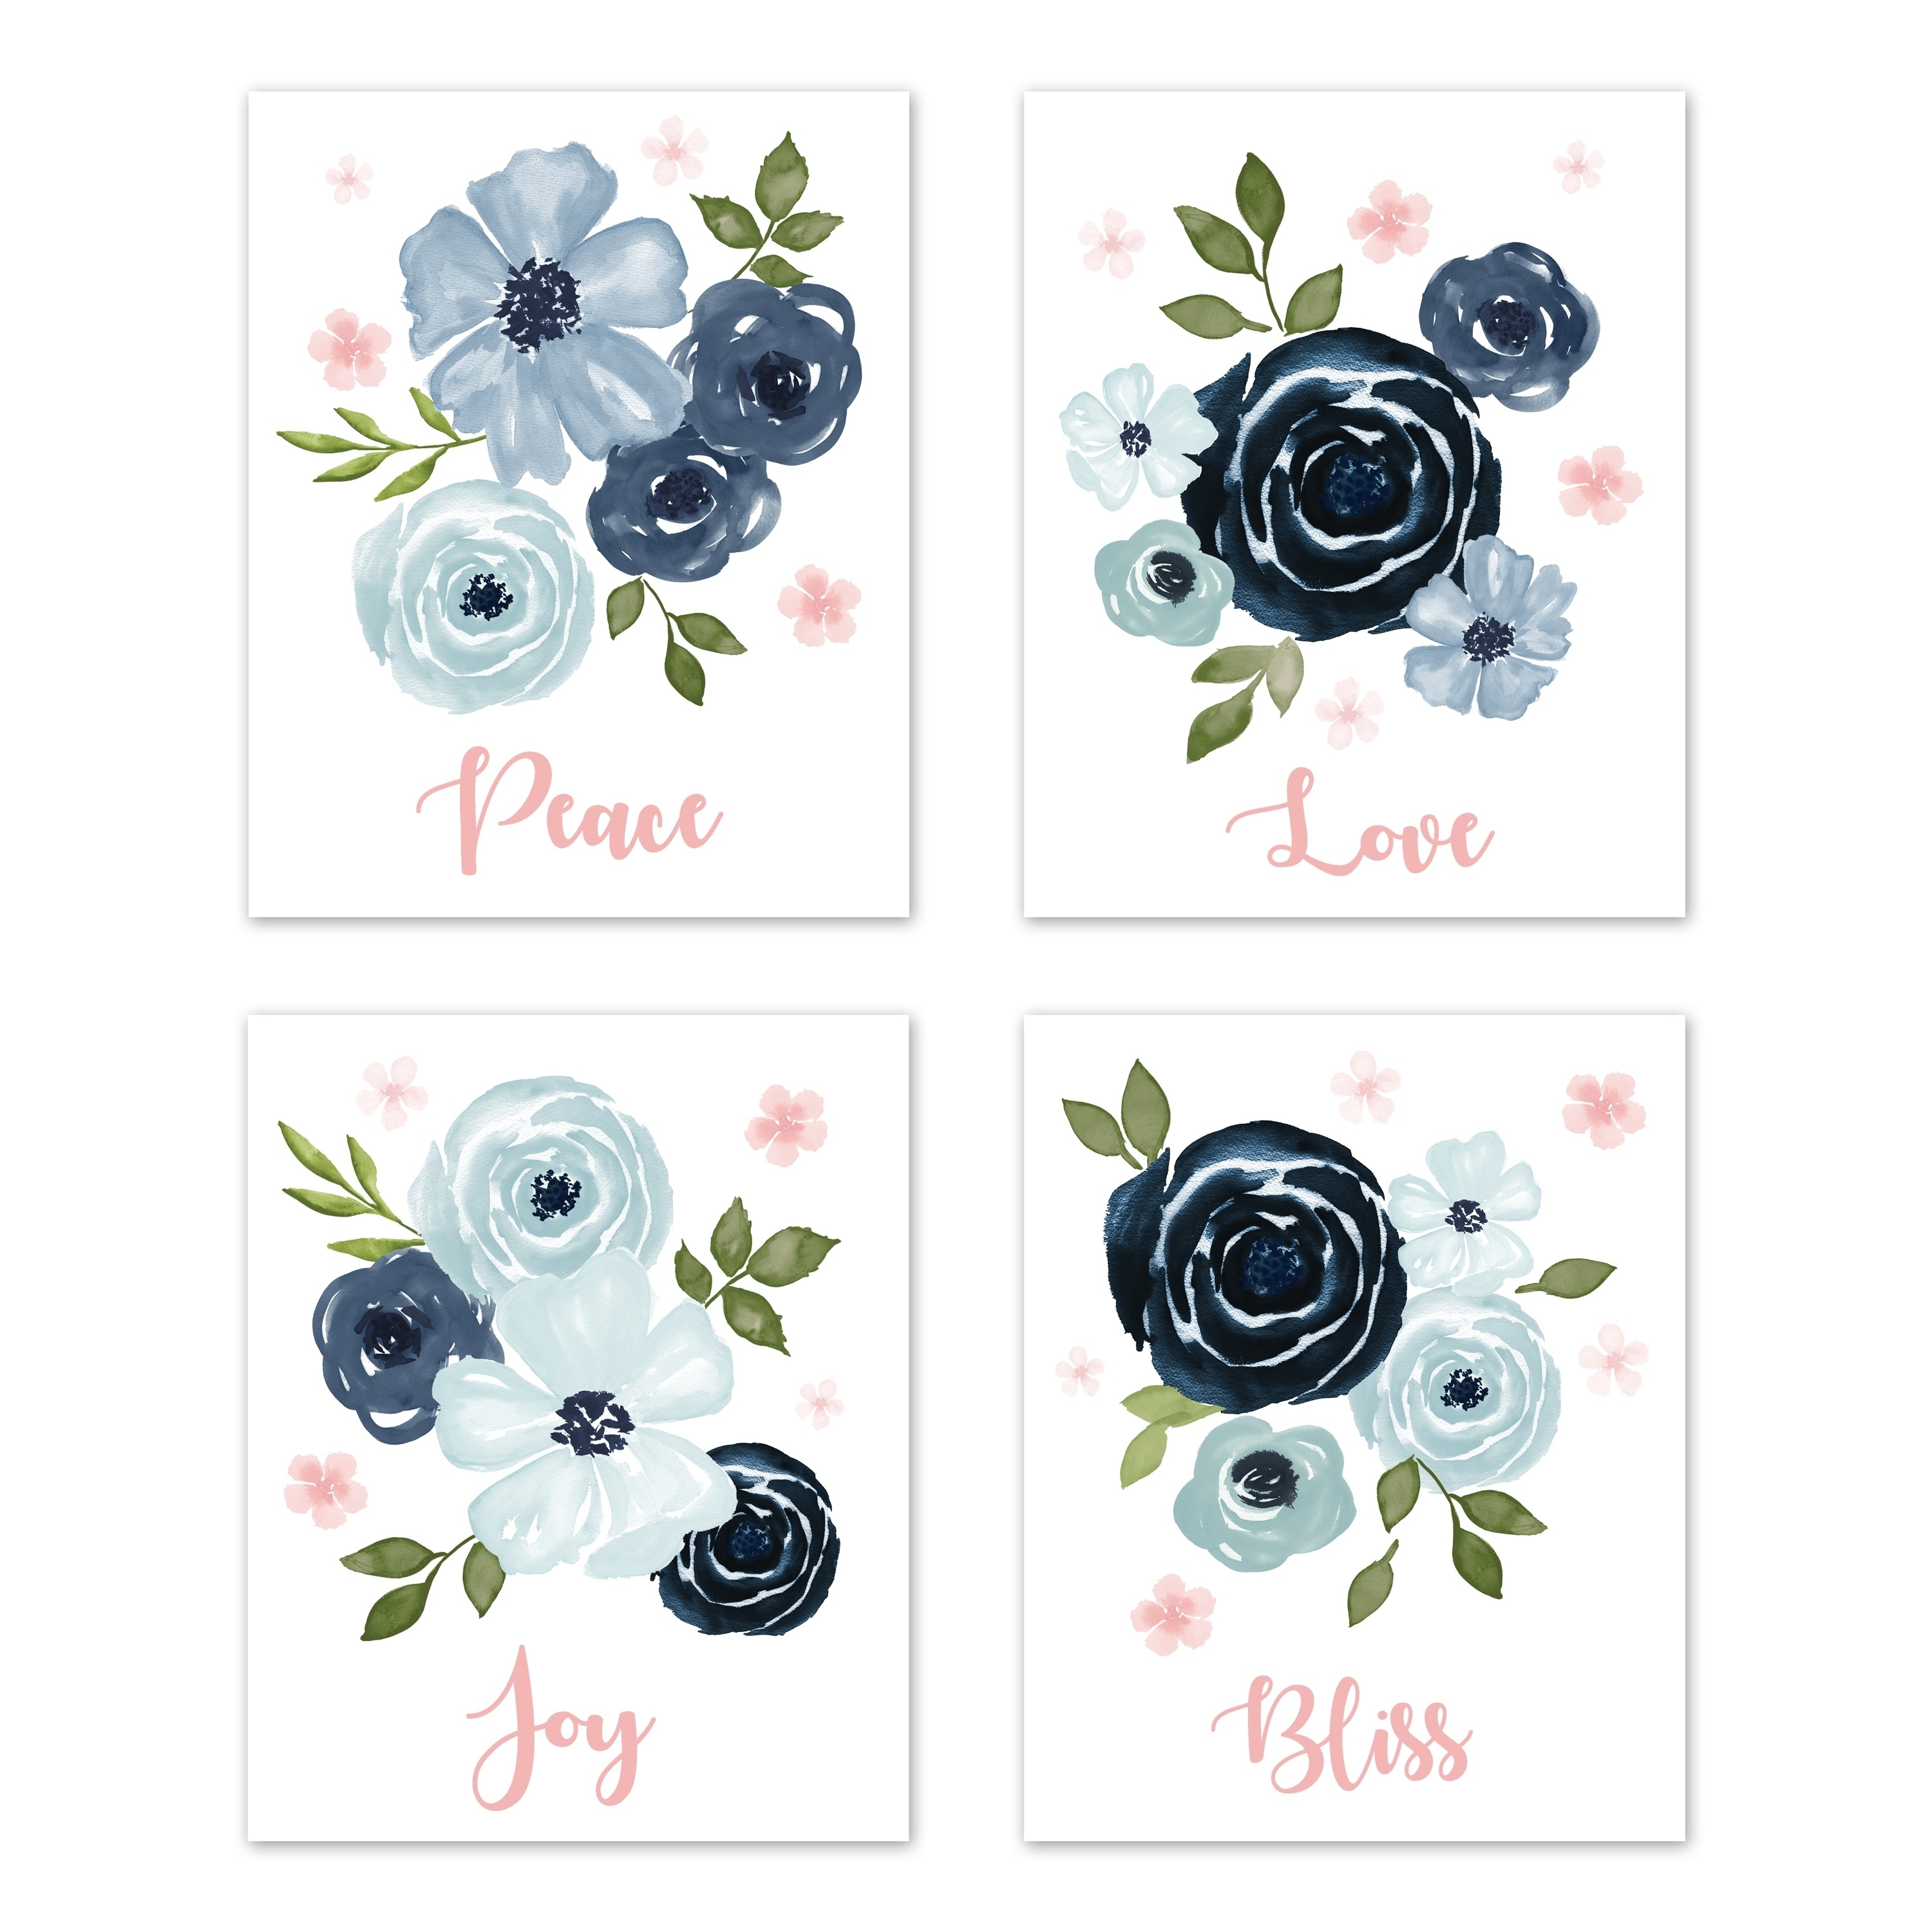 Shop Sweet Jojo Designs Navy Blue And Pink Watercolor Floral Wall Art Prints Set Of 4 Blush Green White Shabby Chic Rose Flower Overstock 30260066